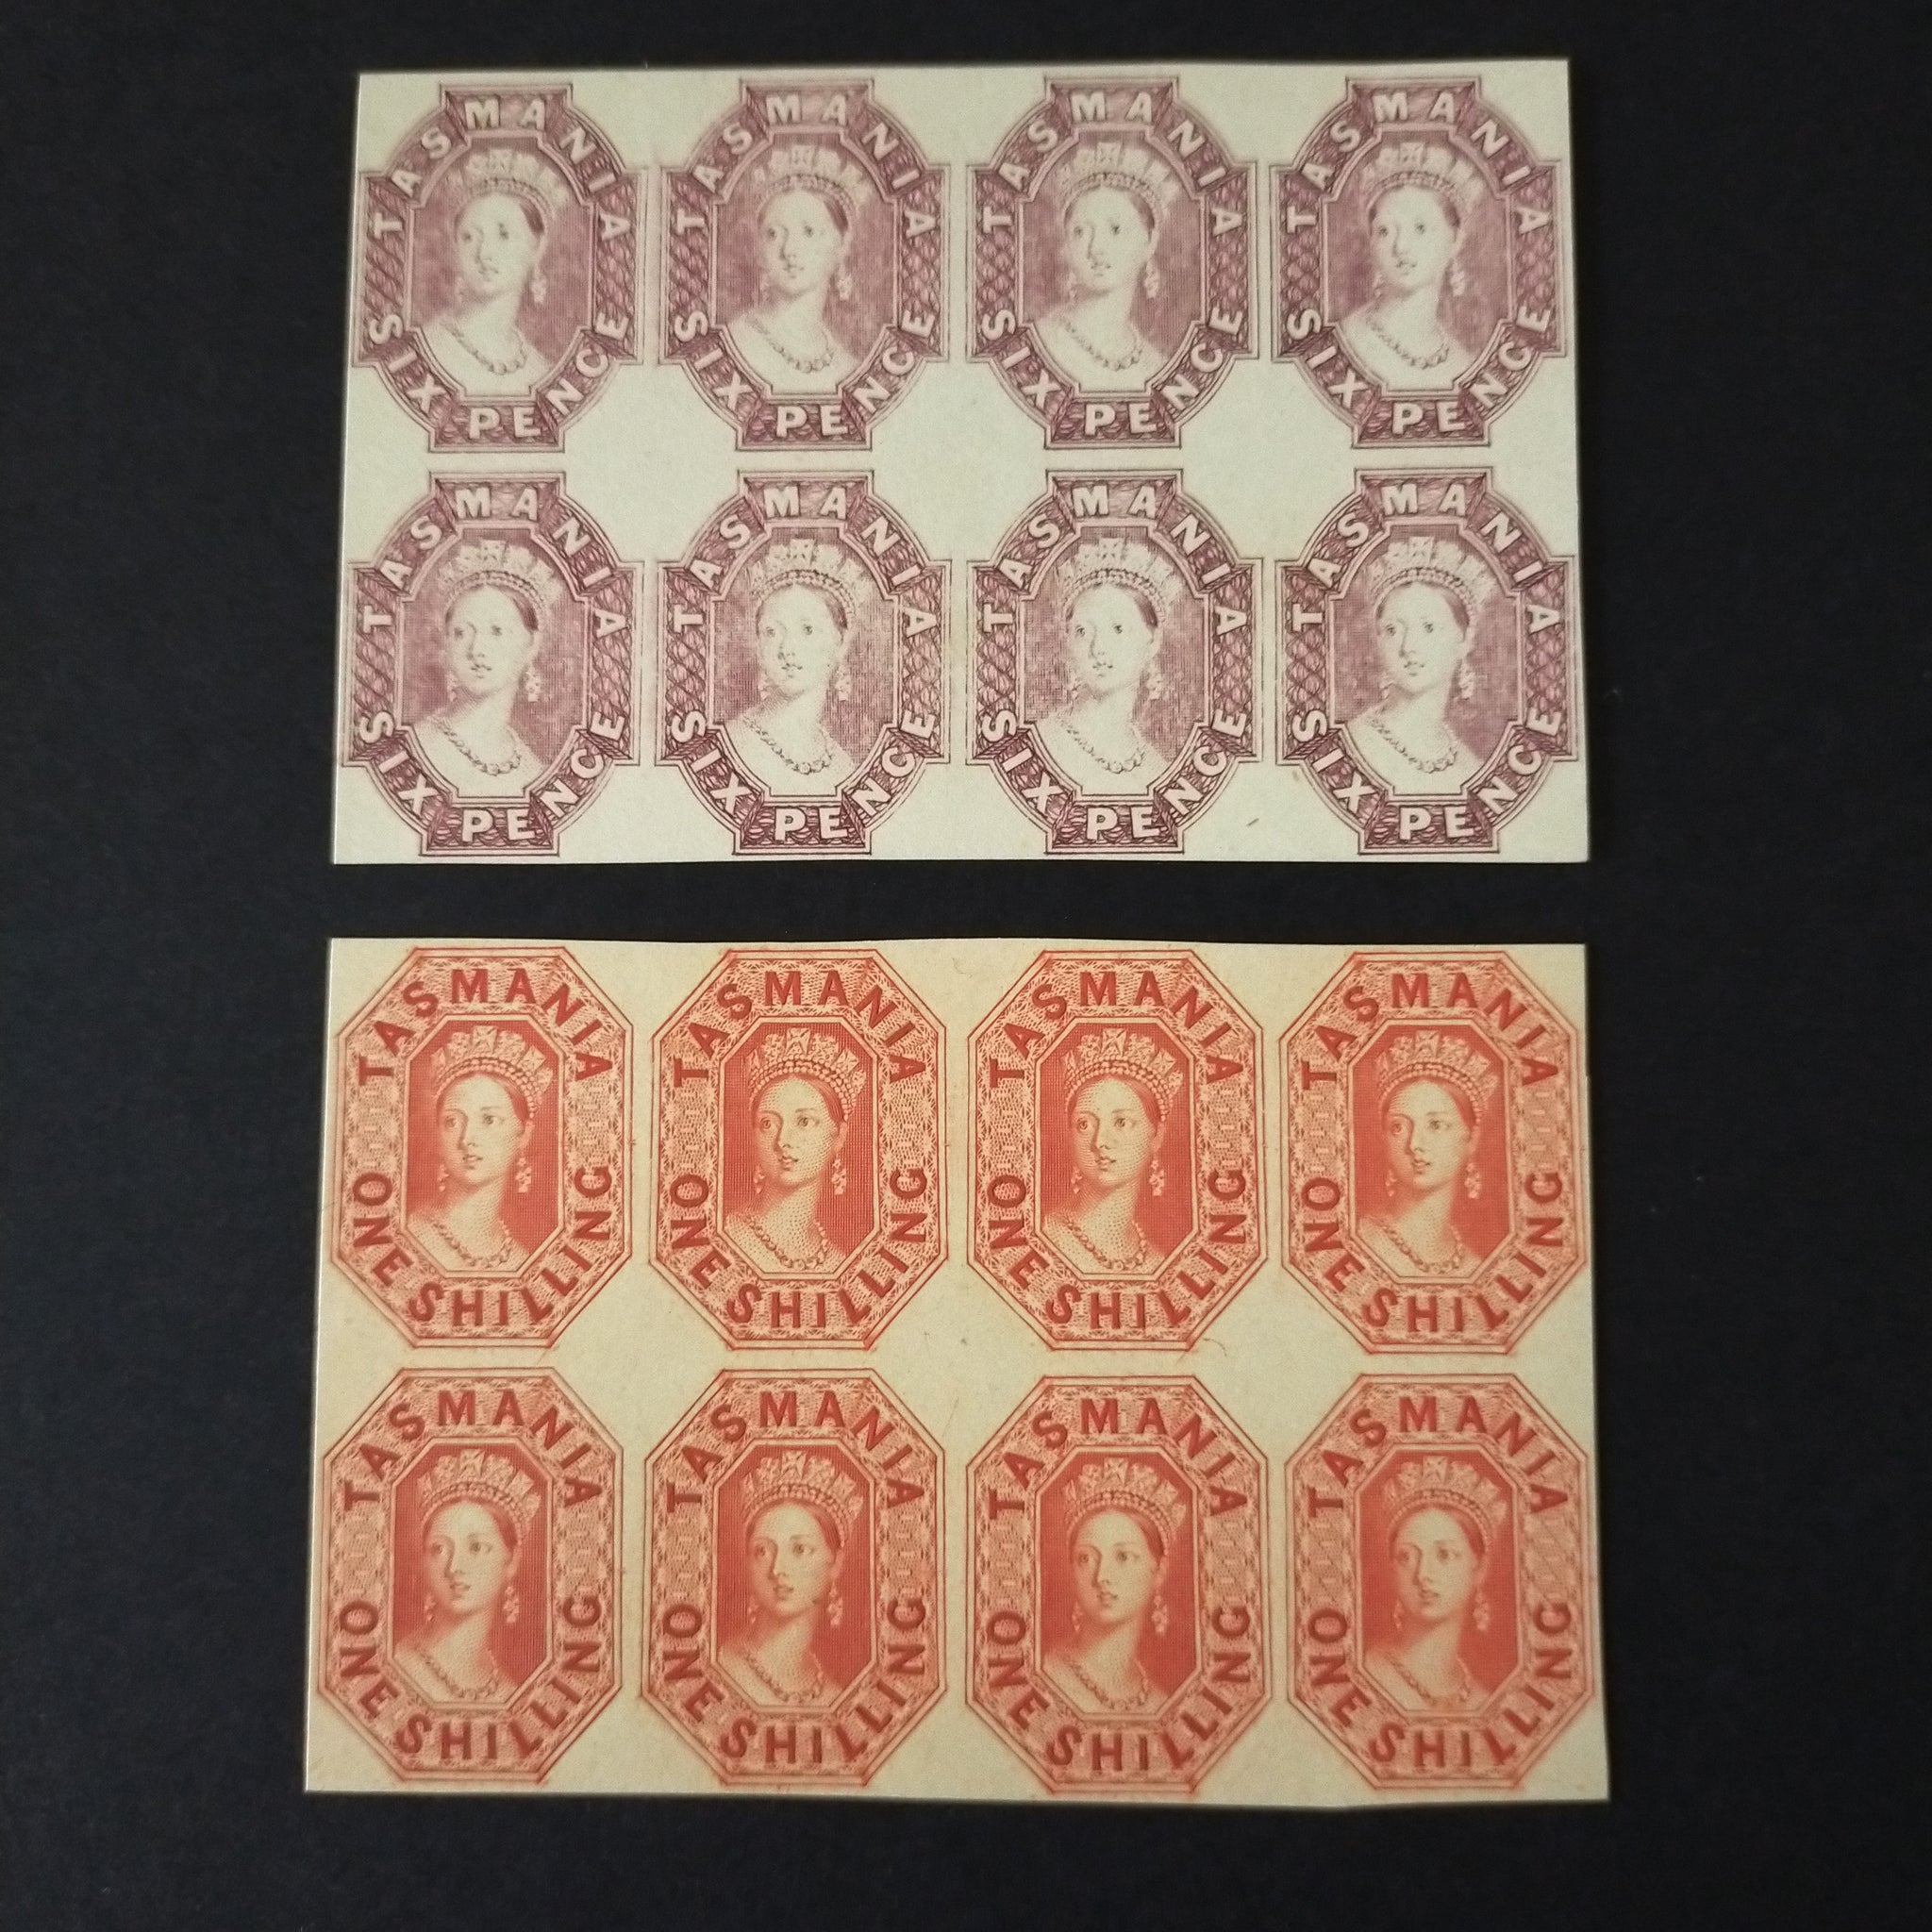 Tasmania Chalons, imperf reprints on thin card 1858 6d dull lilac & 1/- vermilion horiz block of 8